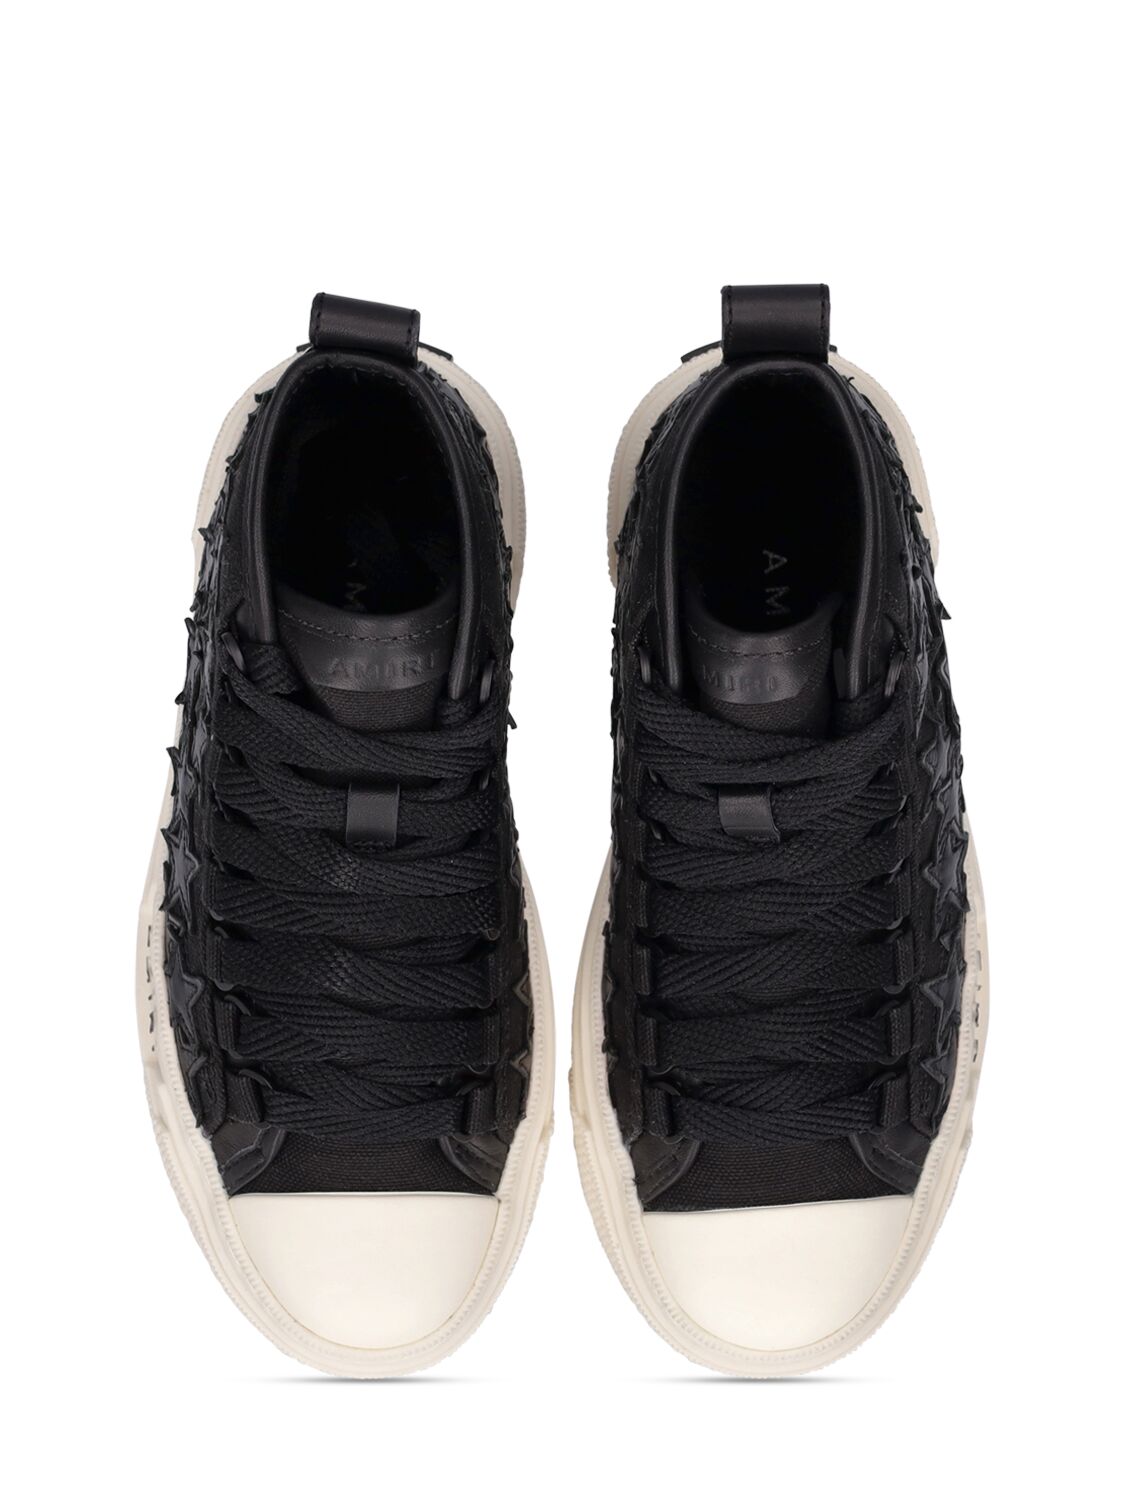 Shop Amiri Cotton Canvas Lace-up Sneakers In Black